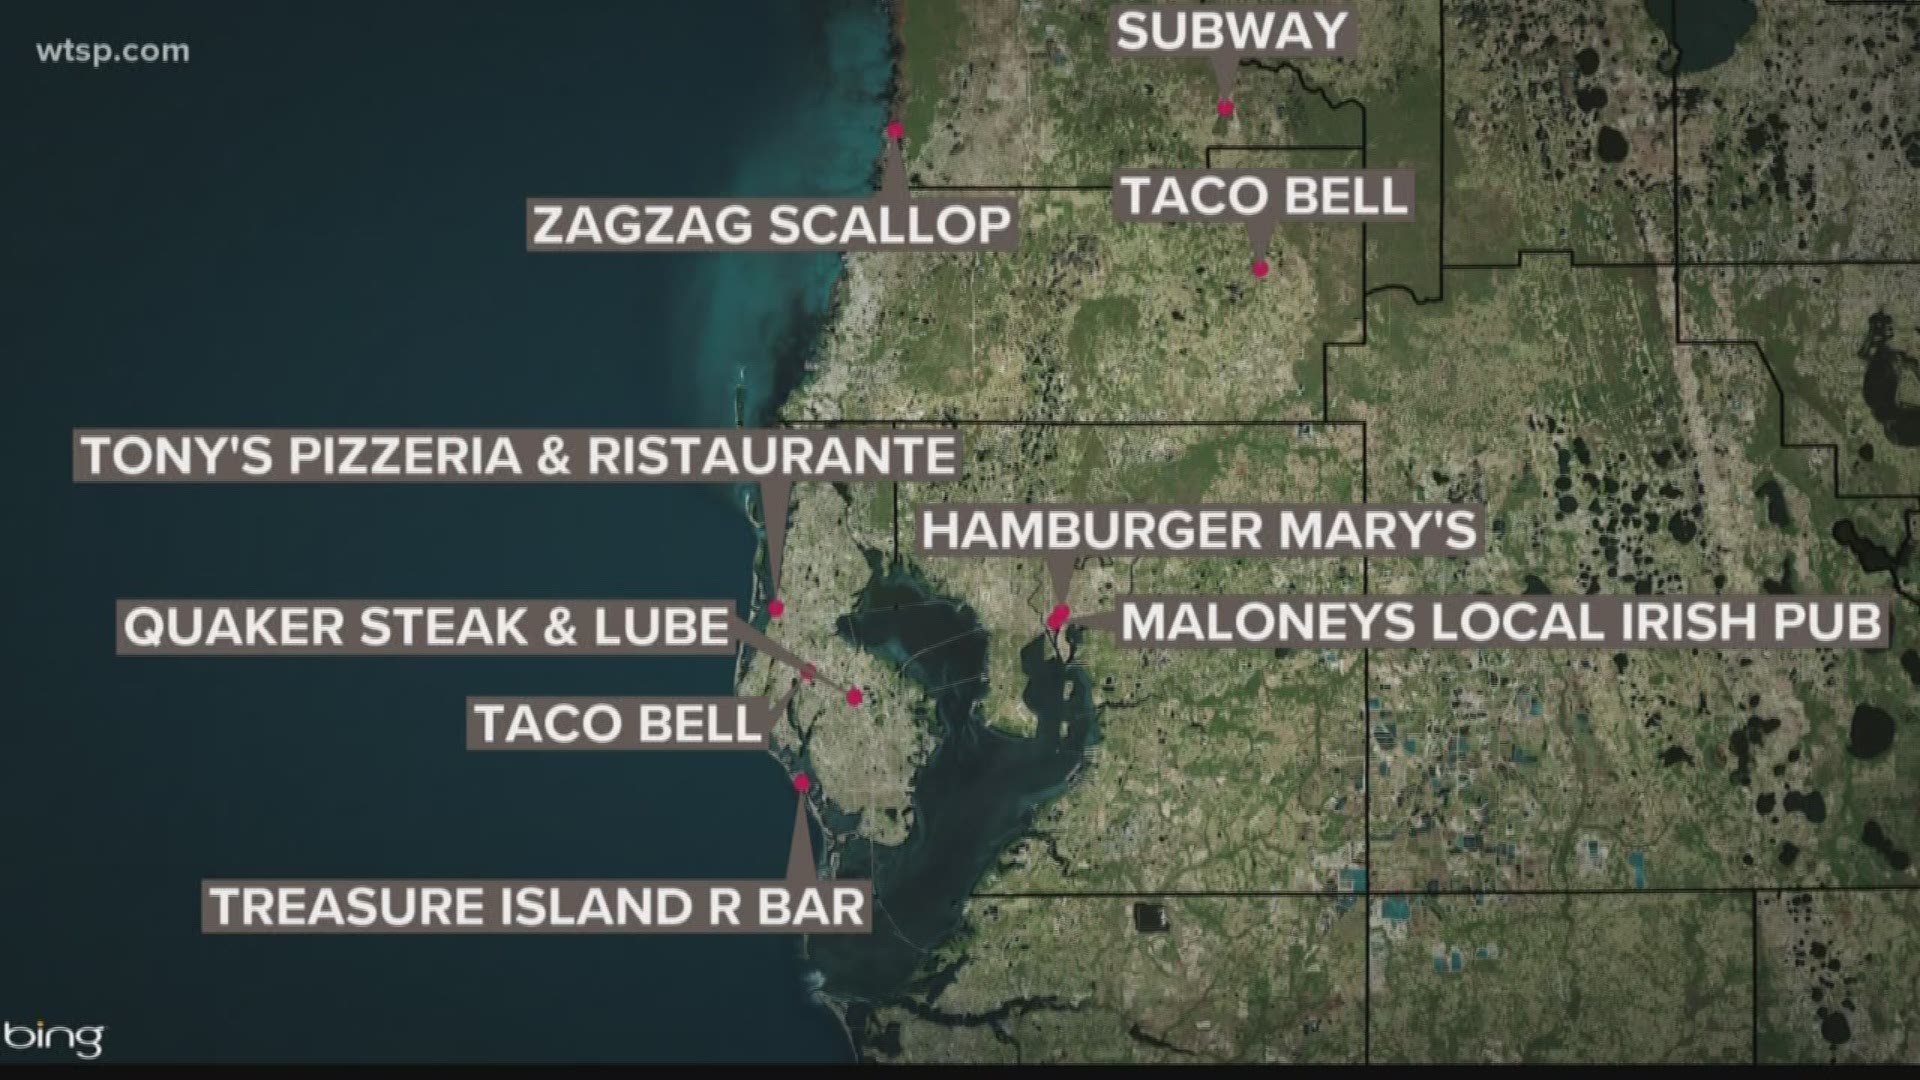 Across the Tampa Bay area, it seems like the hepatitis A outbreak keeps spreading given more and more cases.

10News put together a list of restaurants where health officials identified a food service worker who tested positive for the virus but the public never was notified.